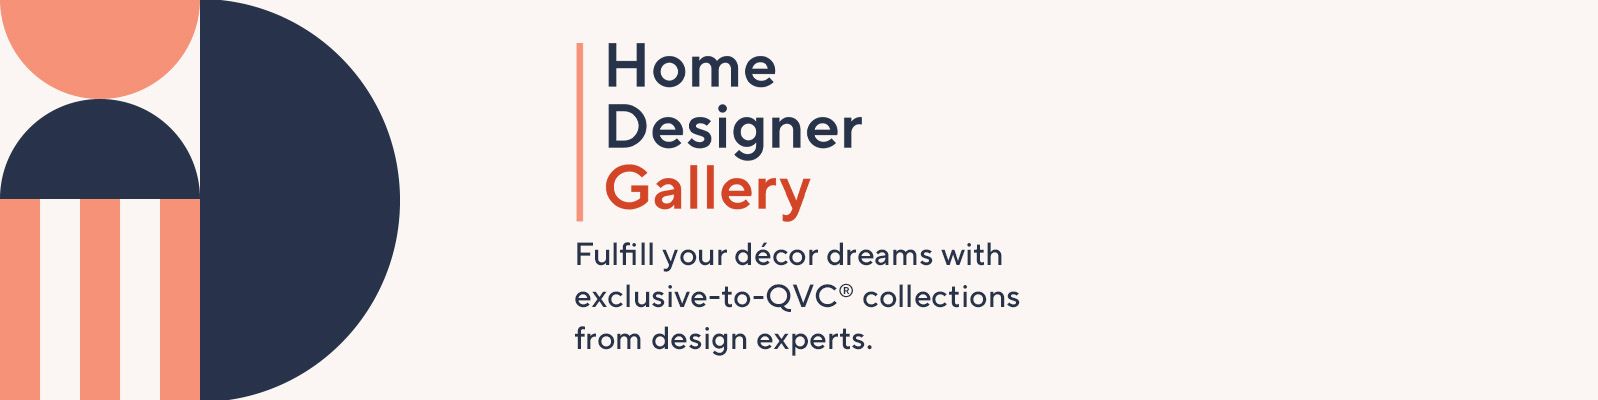 Home Designer Gallery Fulfill your décor dreams with exclusive-to-QVC® collections from design experts. 